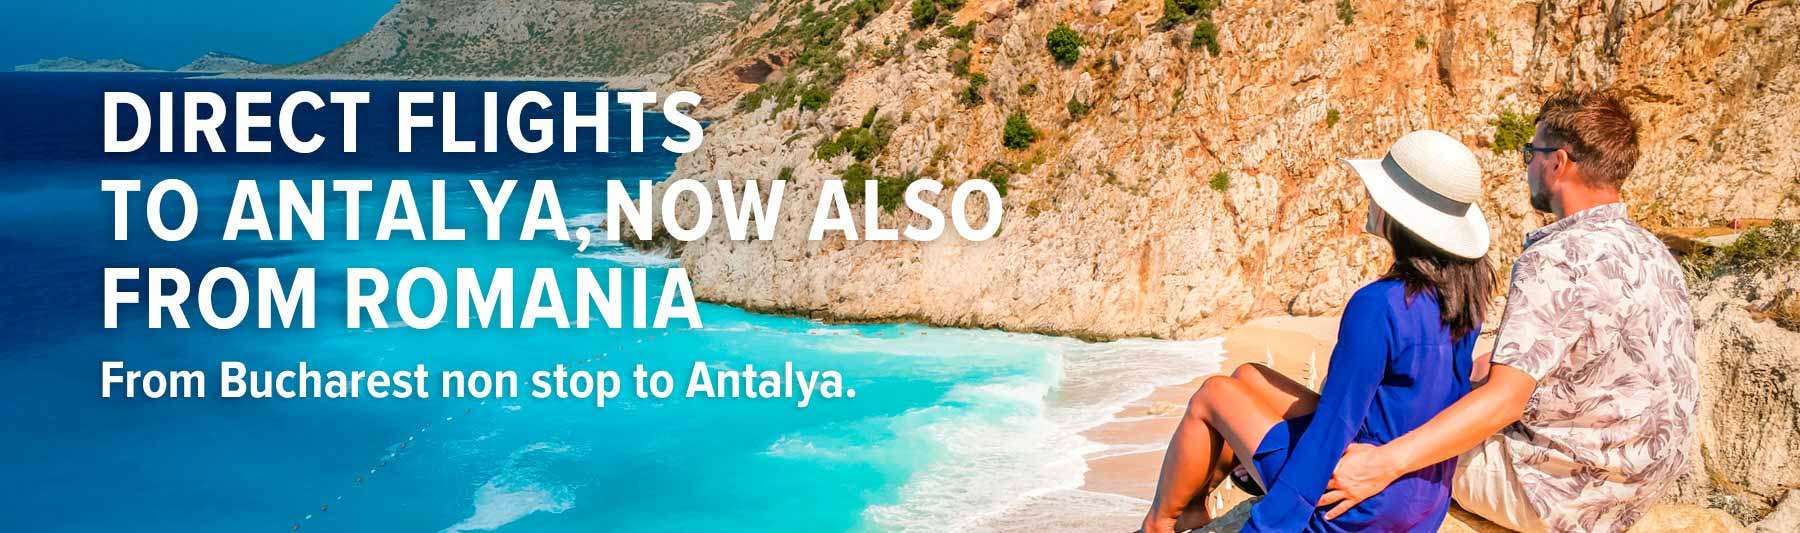 Direct flights to Antalya, now also from Romania